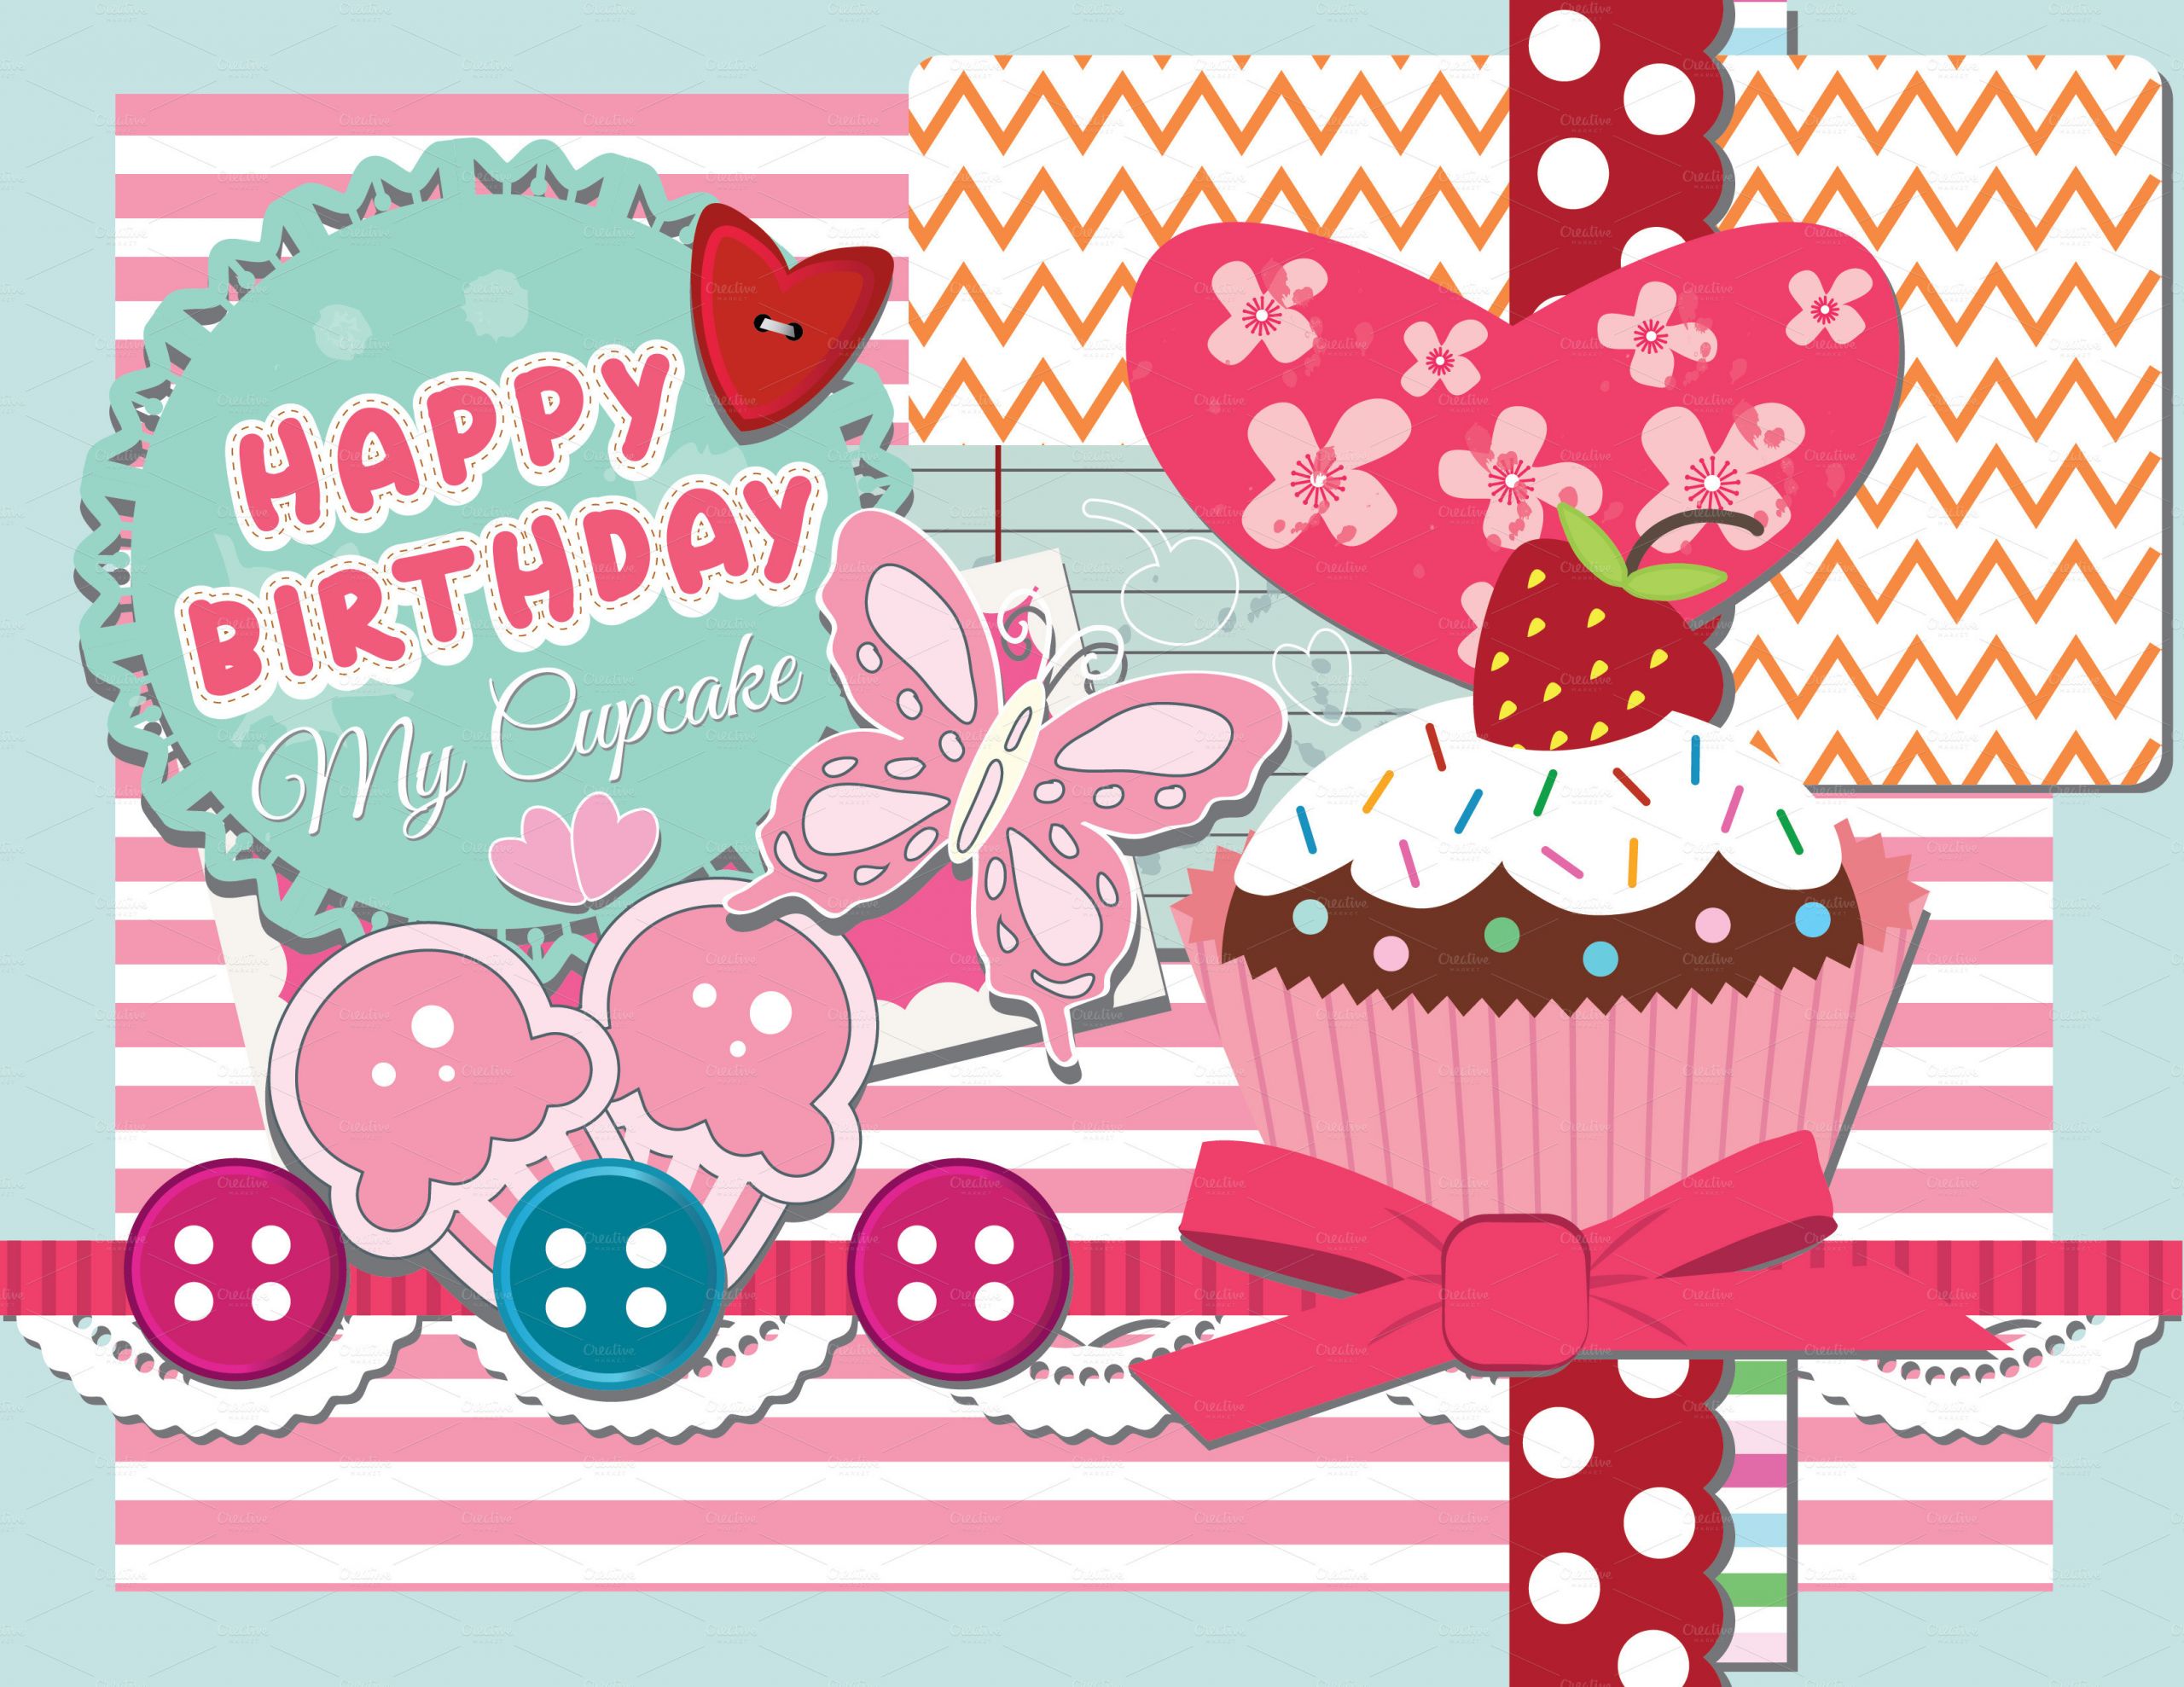 Birthday Cards For Girls
 35 Happy Birthday Cards Free To Download – The WoW Style